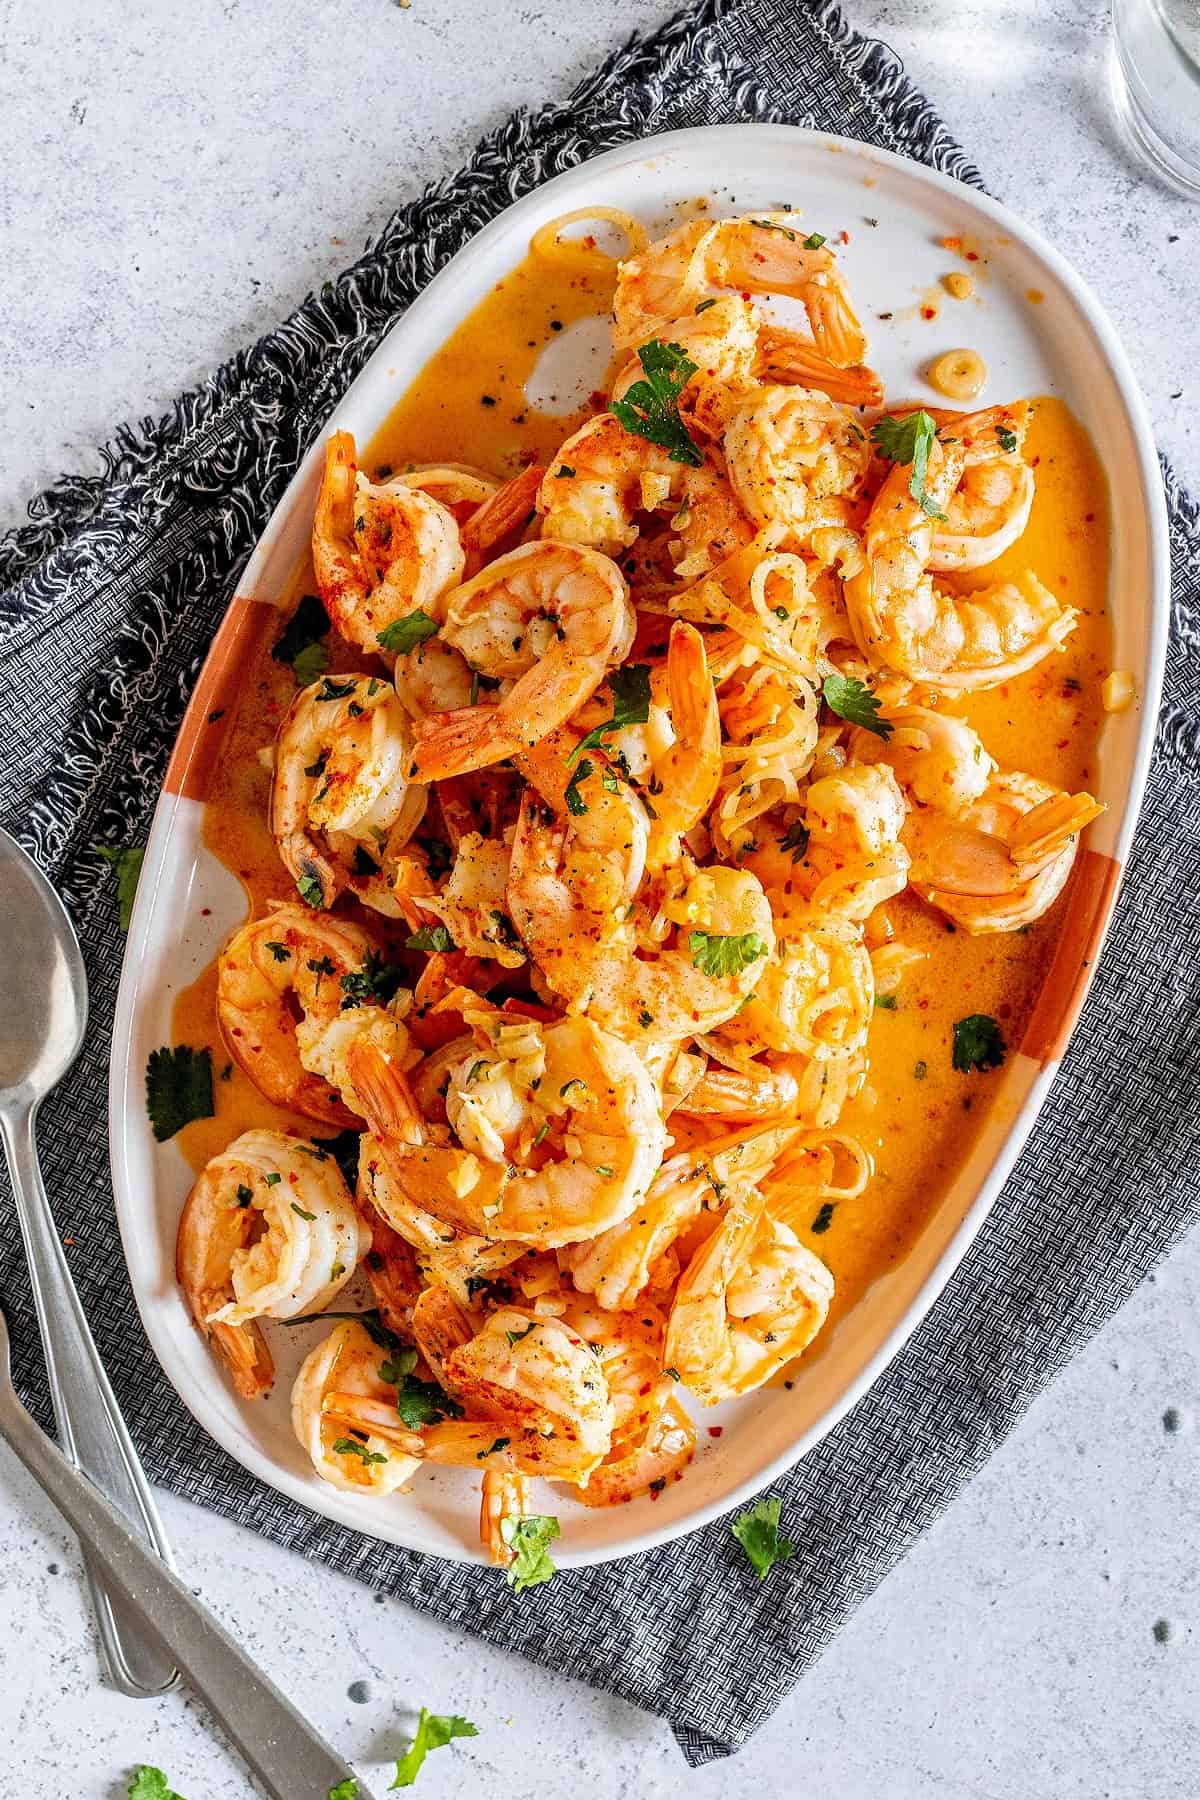 low carb Shrimp Scampi recipe cooked on a on a plate with fresh parsley, shallots, cooked garlic cloves and shrimp scampi sauce.